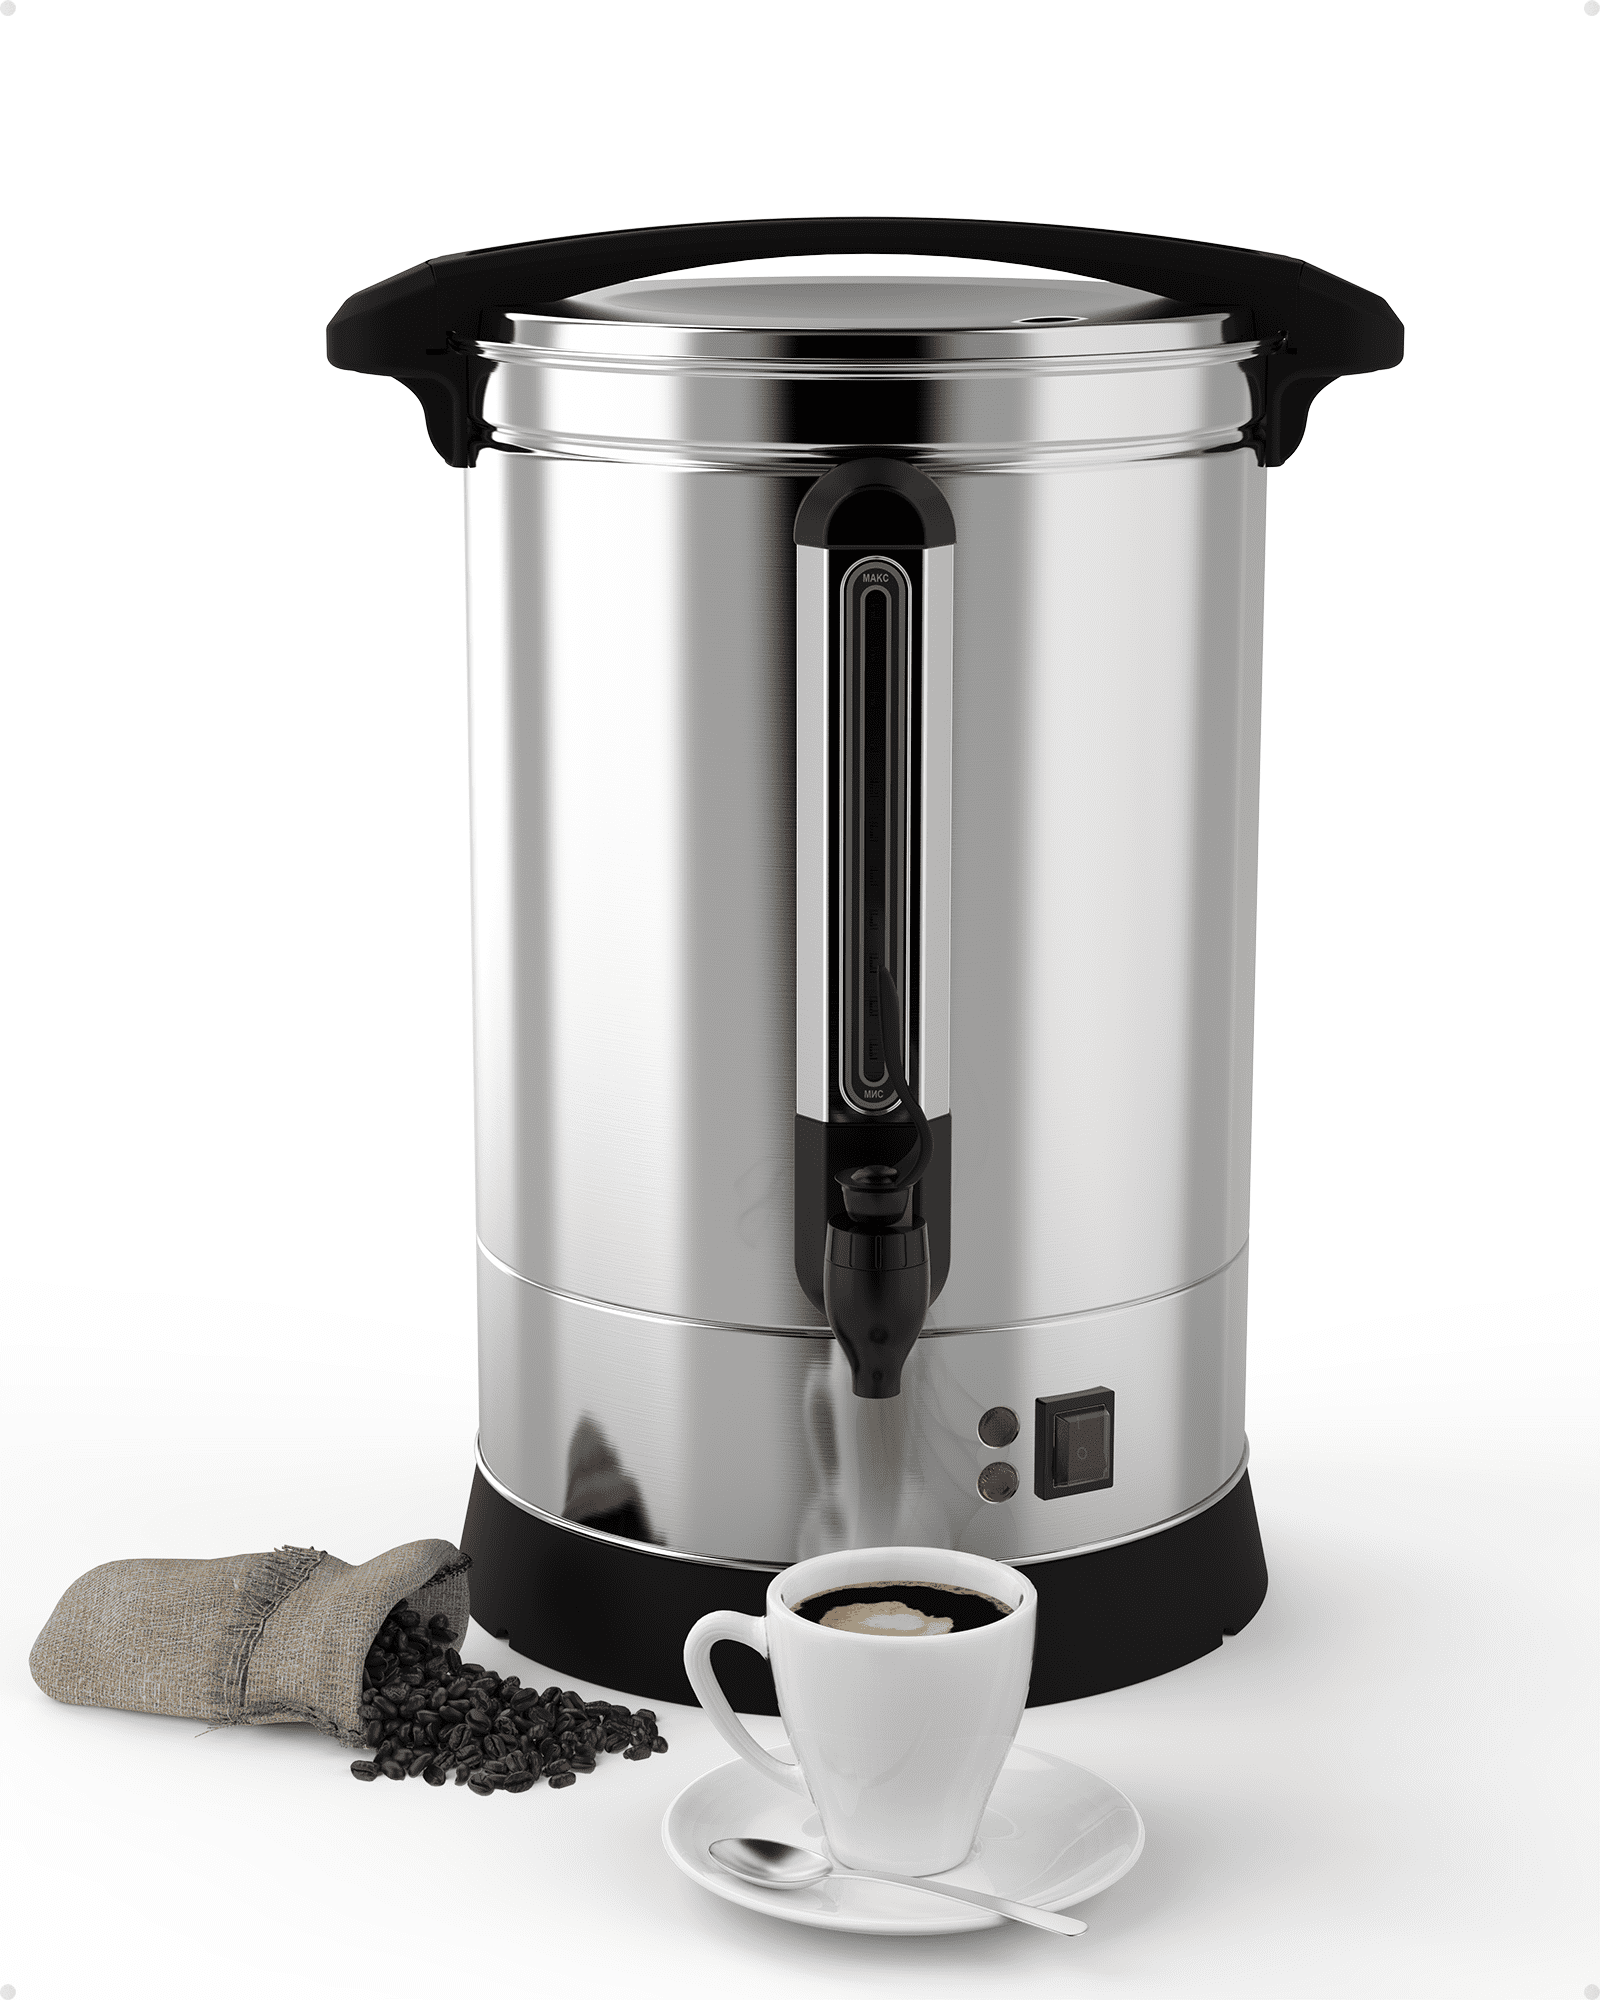 Coffee Pro 50-cup Stainless Steel Urn/Coffeemaker - 50 Cup(s) - Multi-serve  - Stainless Steel - Stainless Steel Body - Thomas Business Center Inc